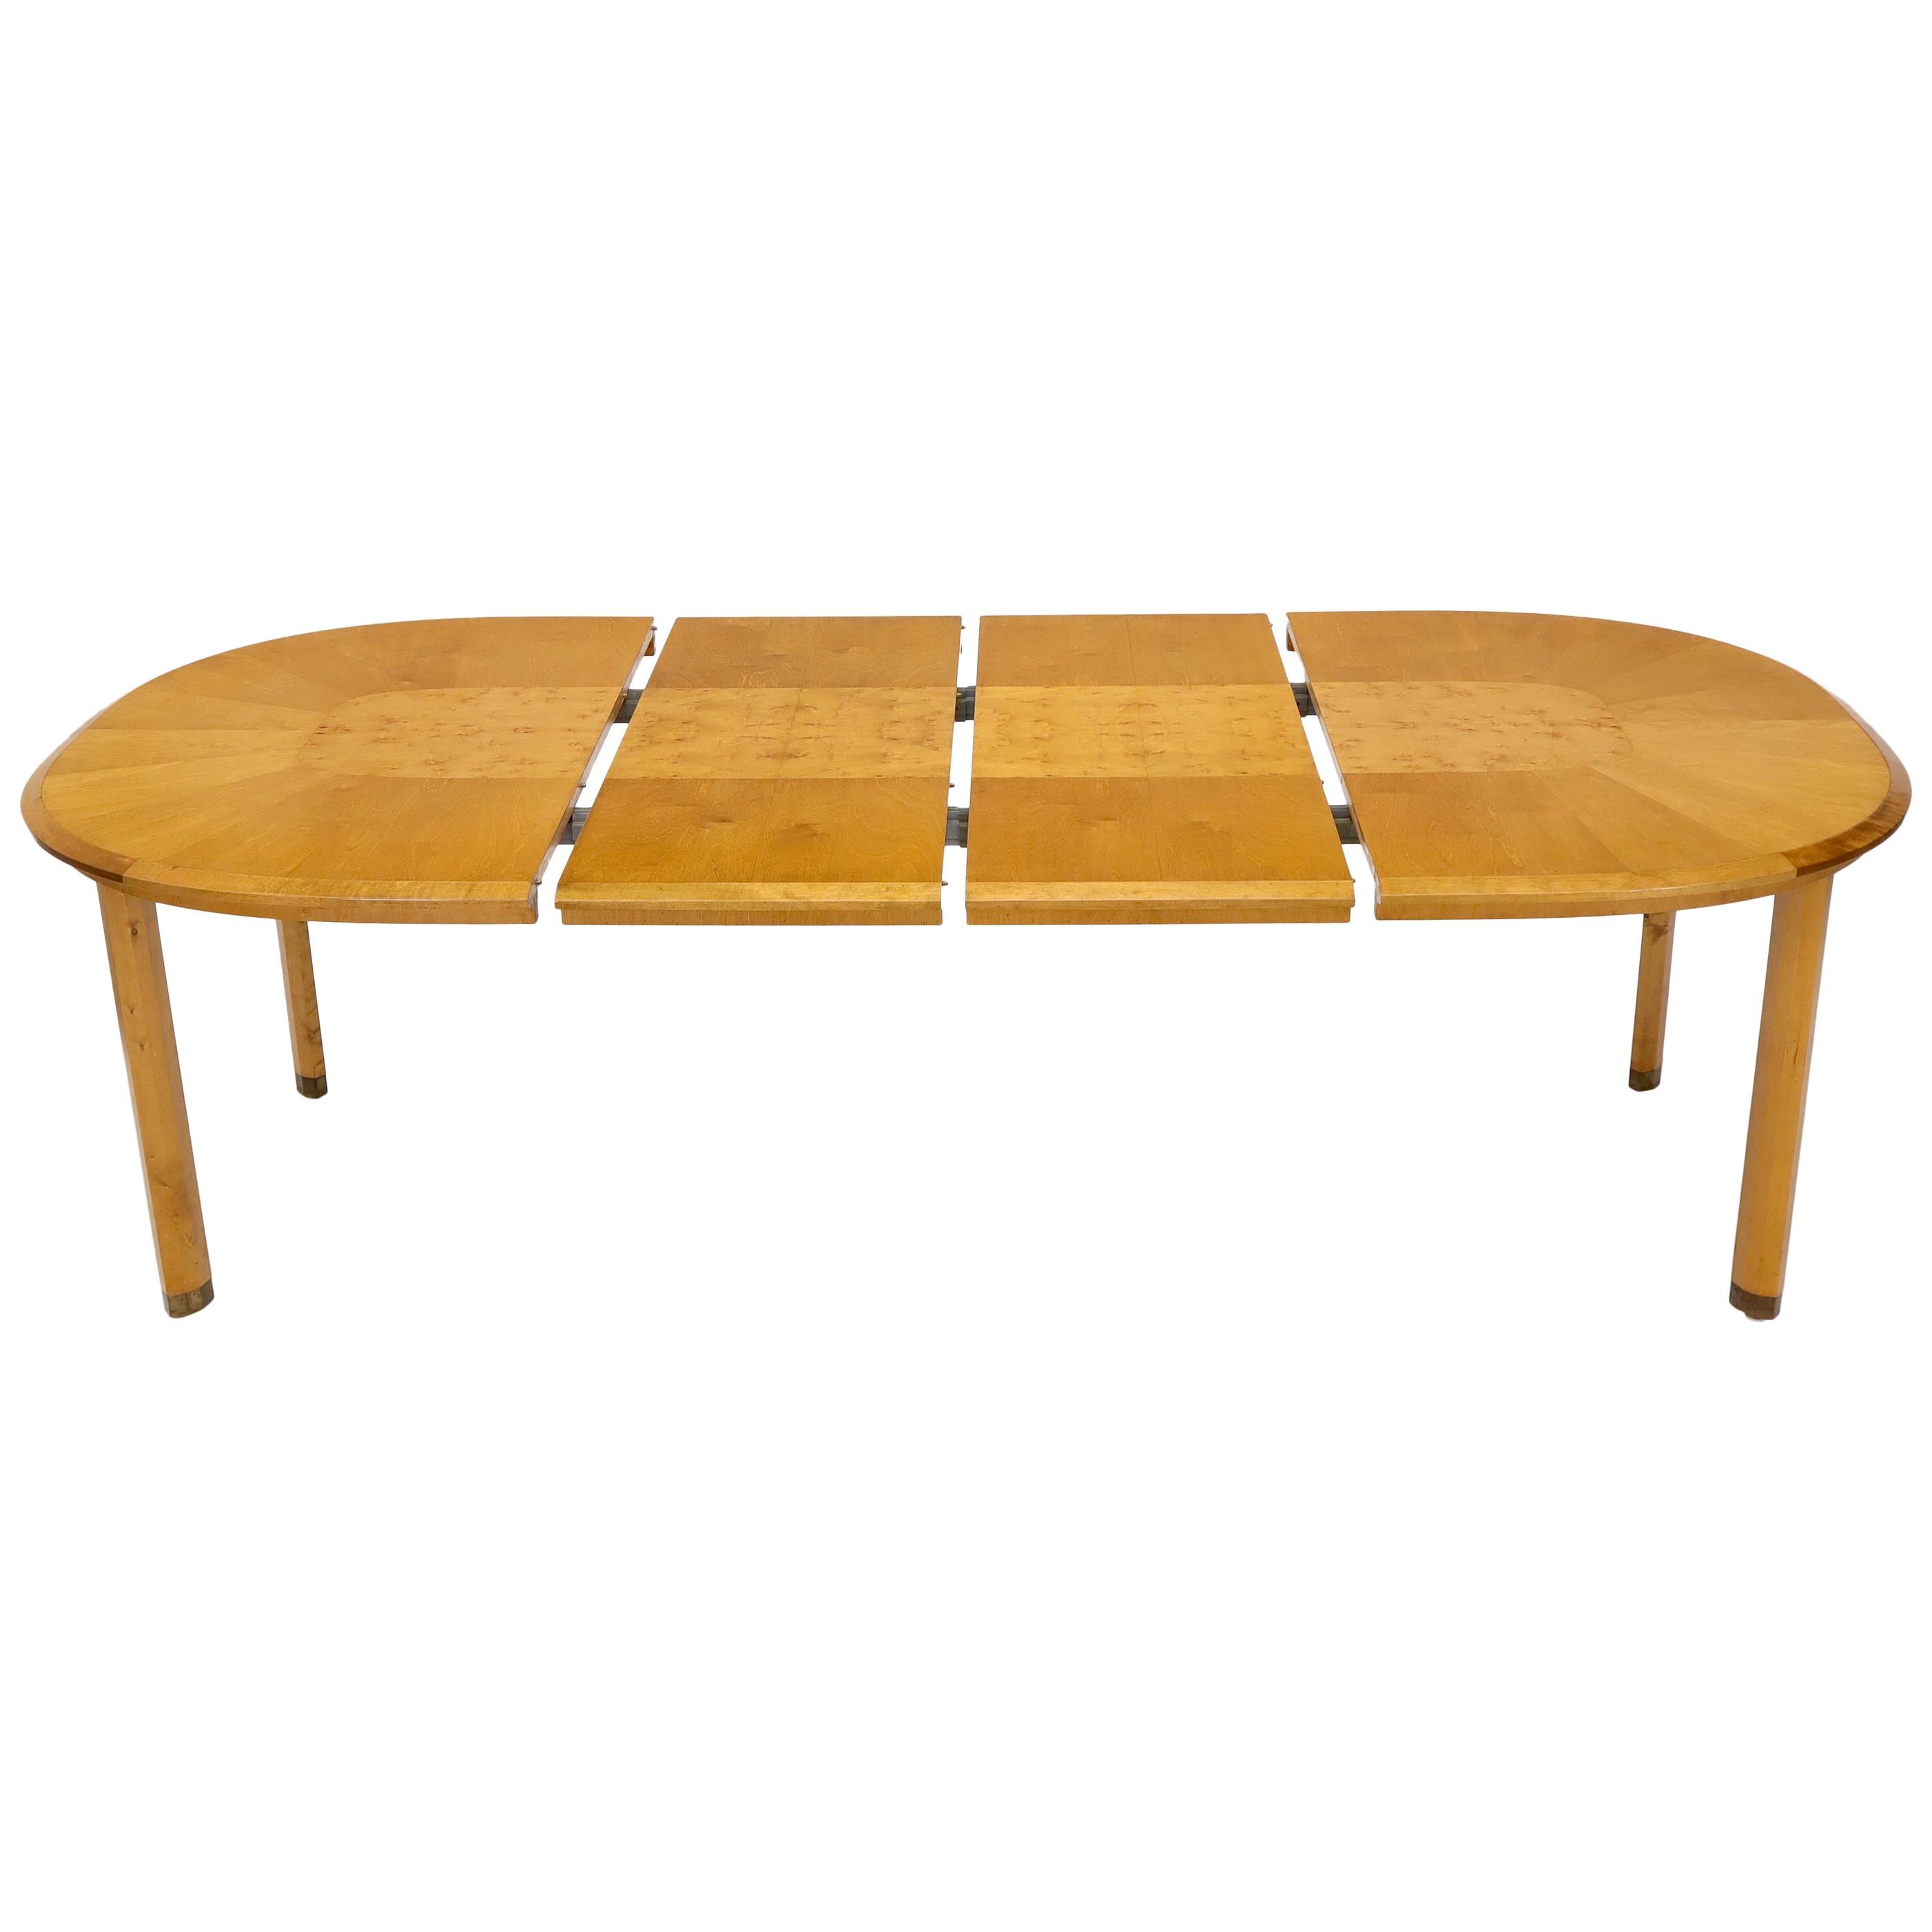 Blond Swedish Birch with Burl Oval Racetrack Dining Table Spece